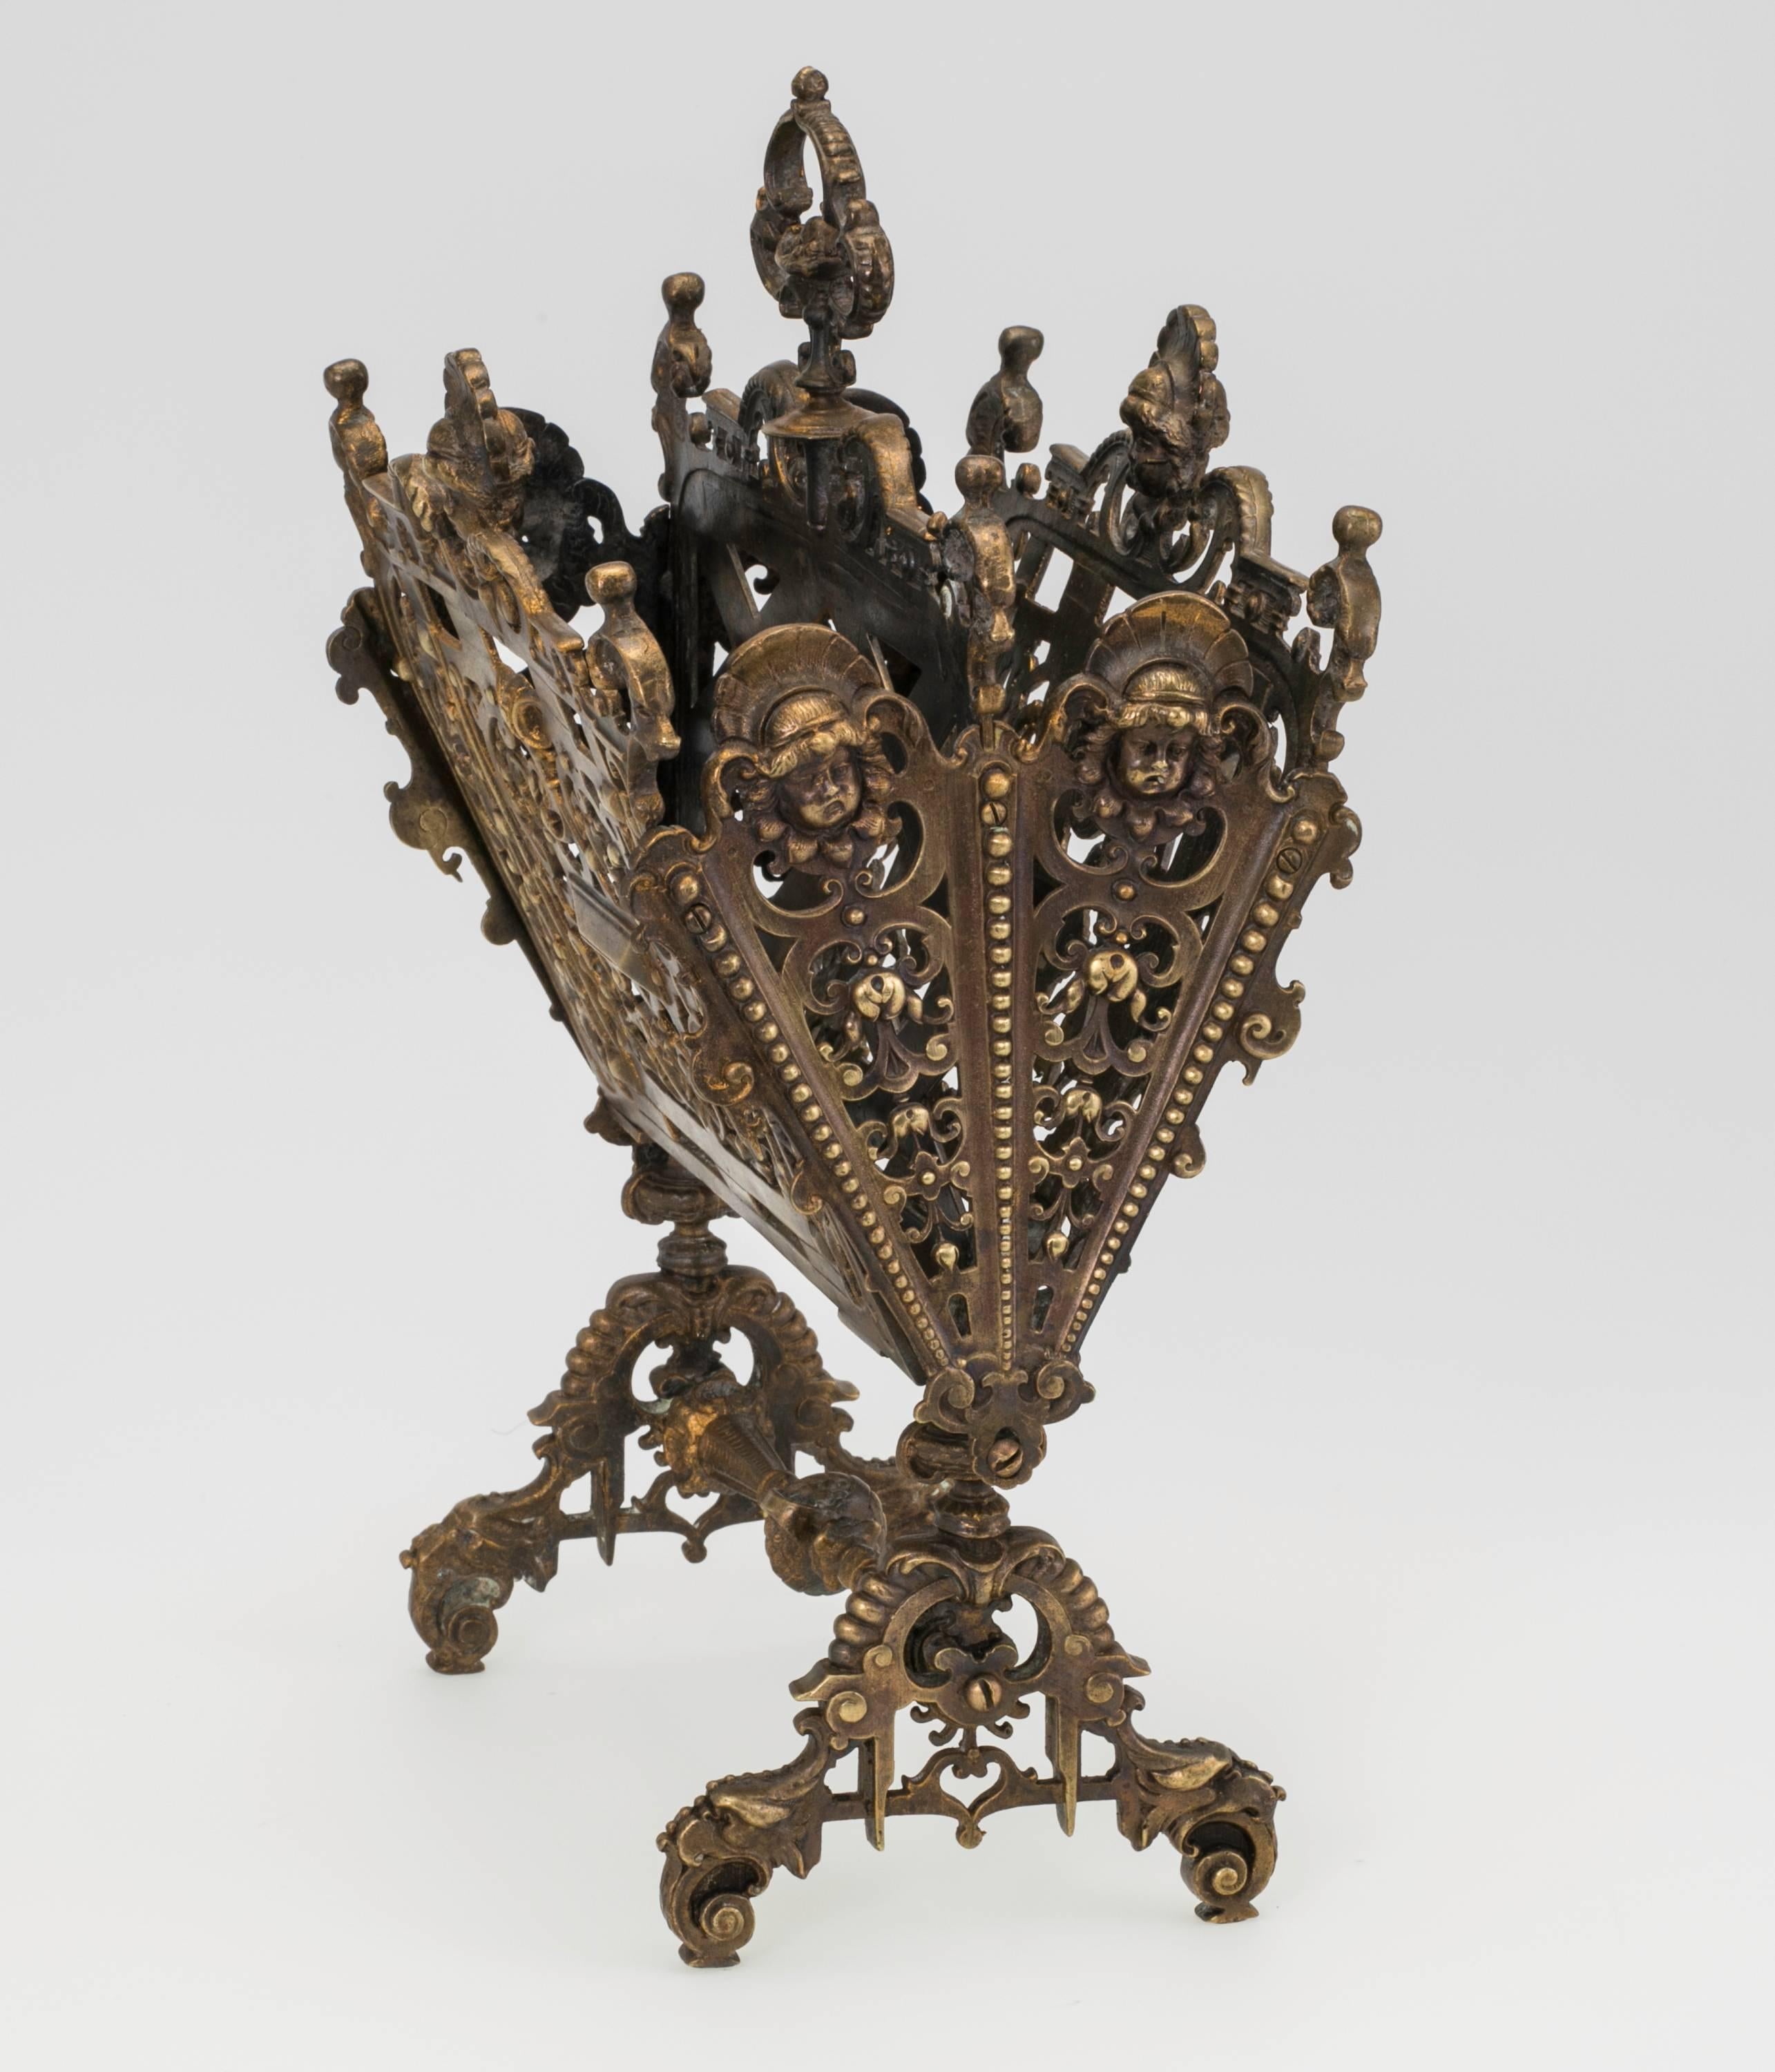 C.1890,  French gilt bronze letter holder. Superbly detailed,  cast bronze pierced work. Decorative theme in lovely female faces. Divided compartments with finial handle. Wonderful accent accessory for your desk.